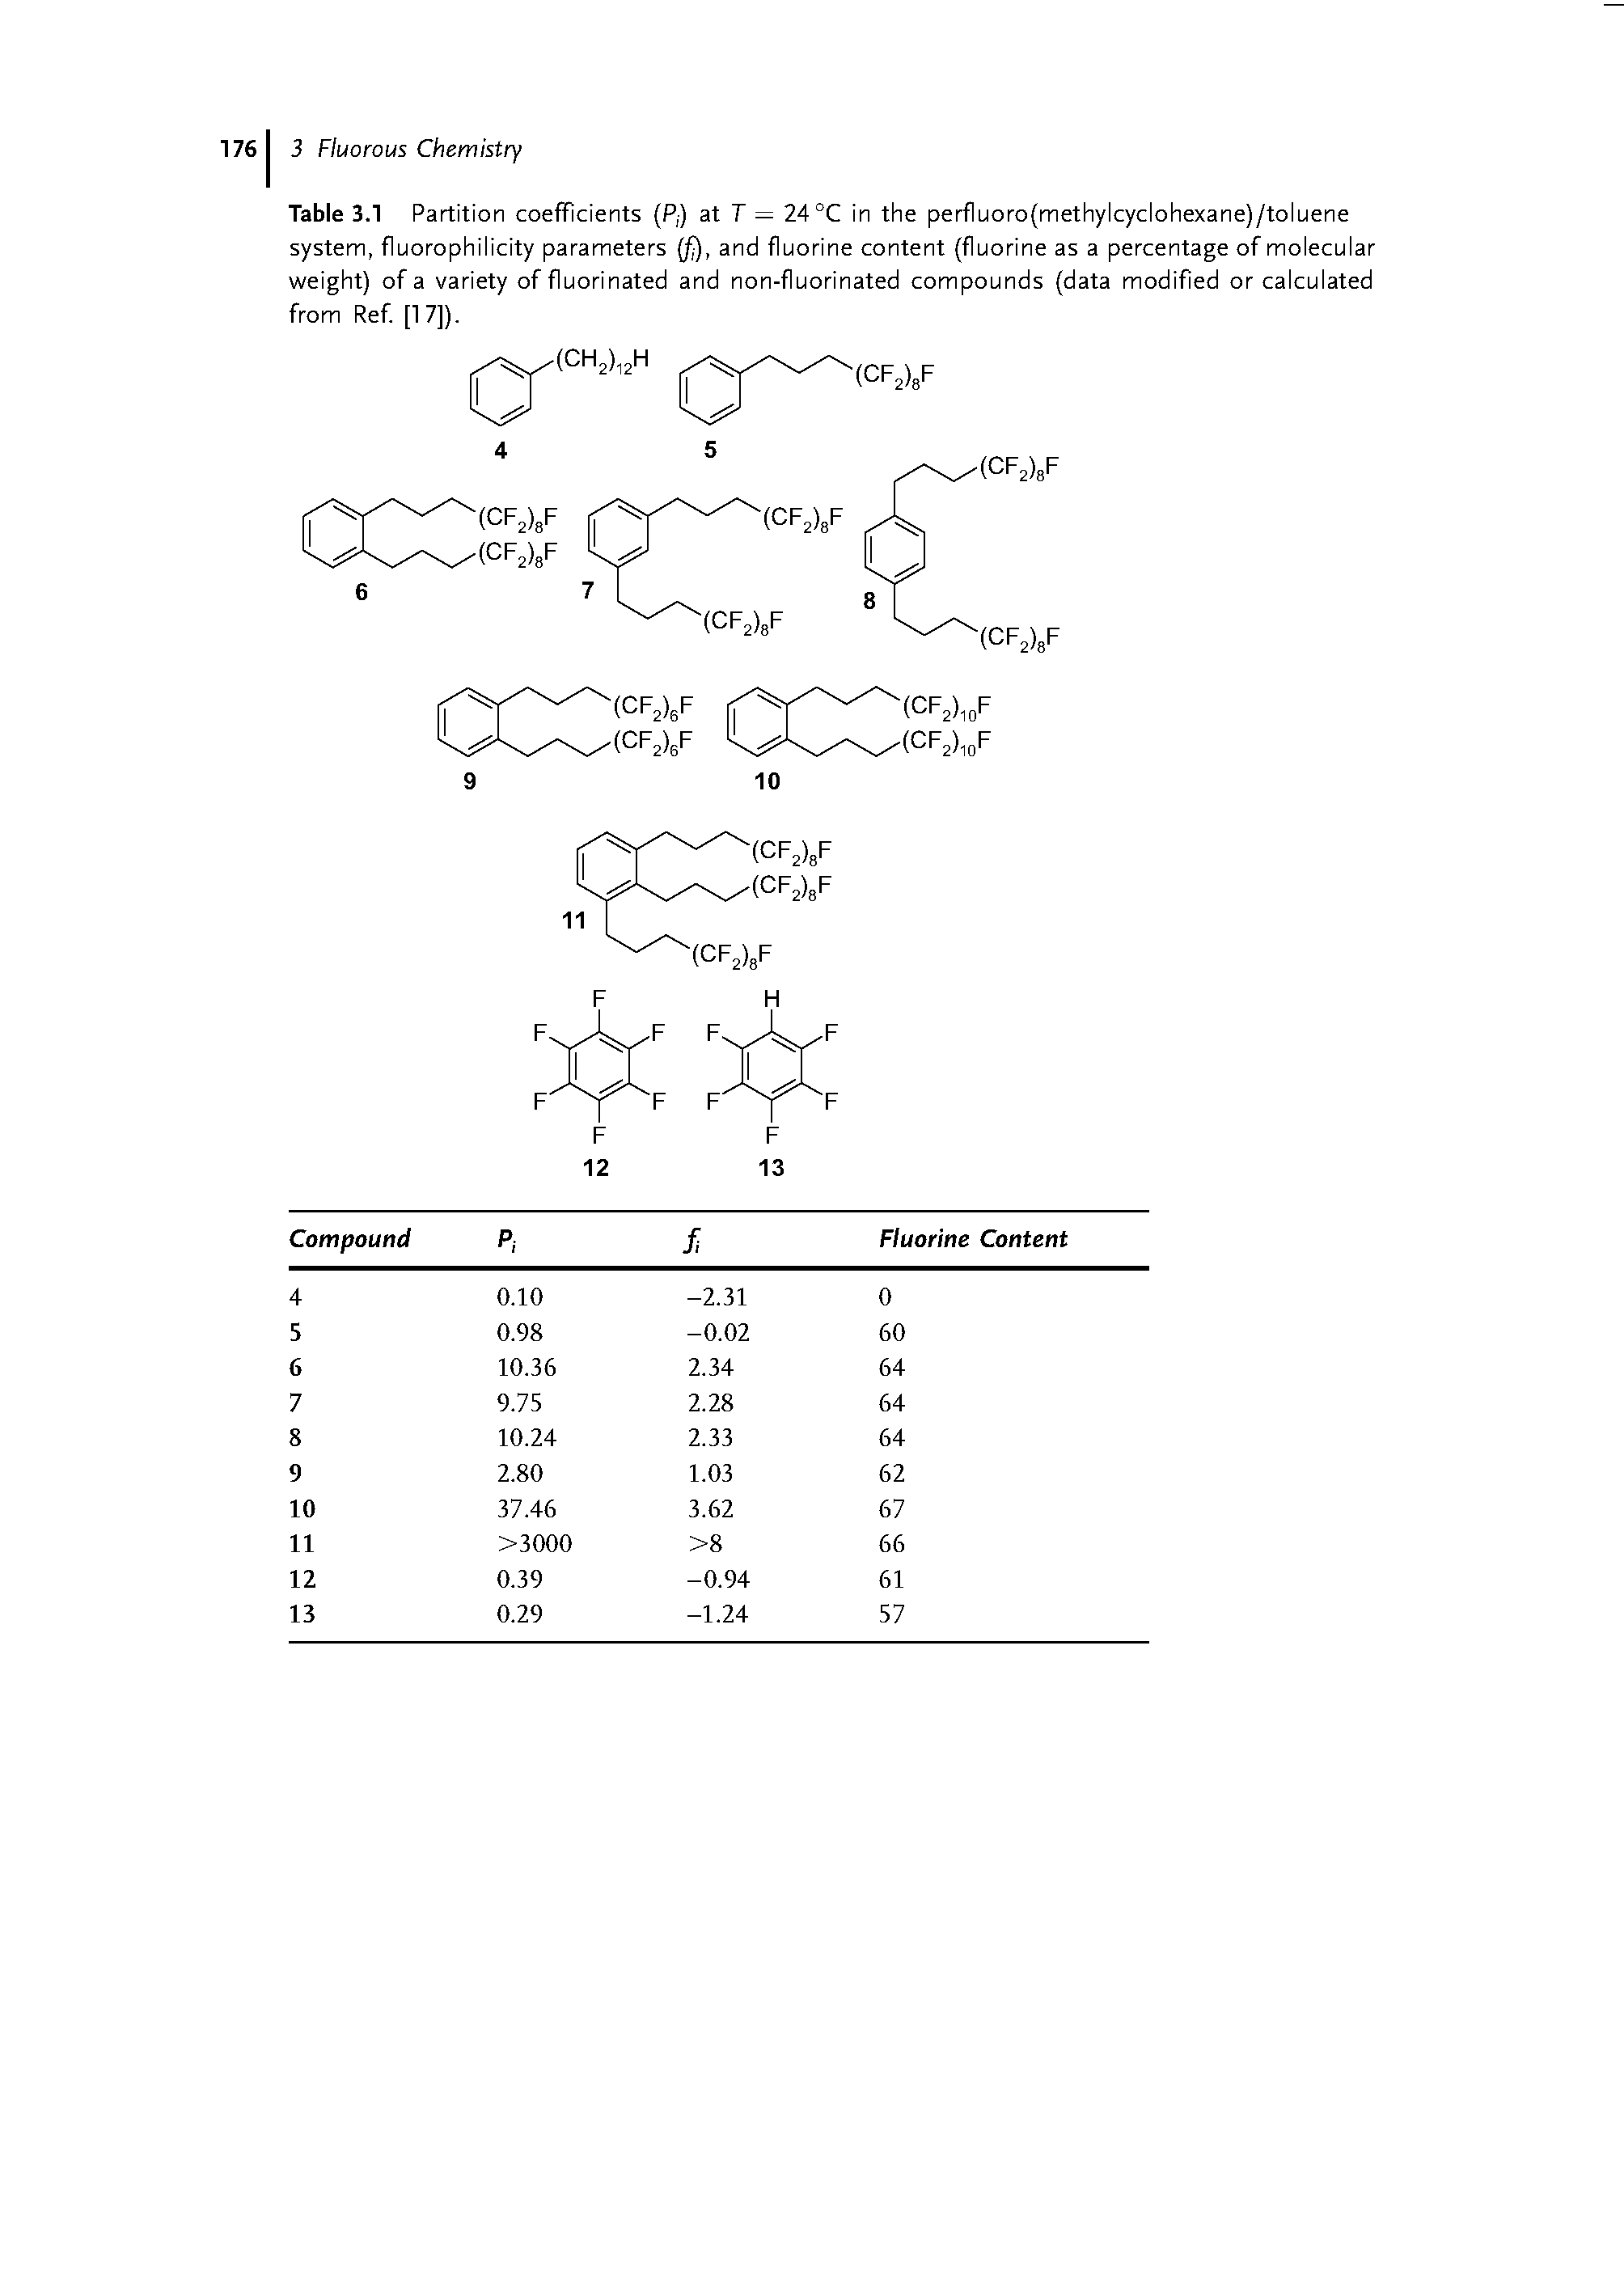 Table 3.1 Partition coefficients (P,) at T — 24 °C in the perfluoro(methylcyclohexane)/toluene system, fluorophilicity parameters (f), and fluorine content (fluorine as a percentage of molecular weight) of a variety of fluorinated and non-fluorinated compounds (data modified or calculated from Ref. [17]).